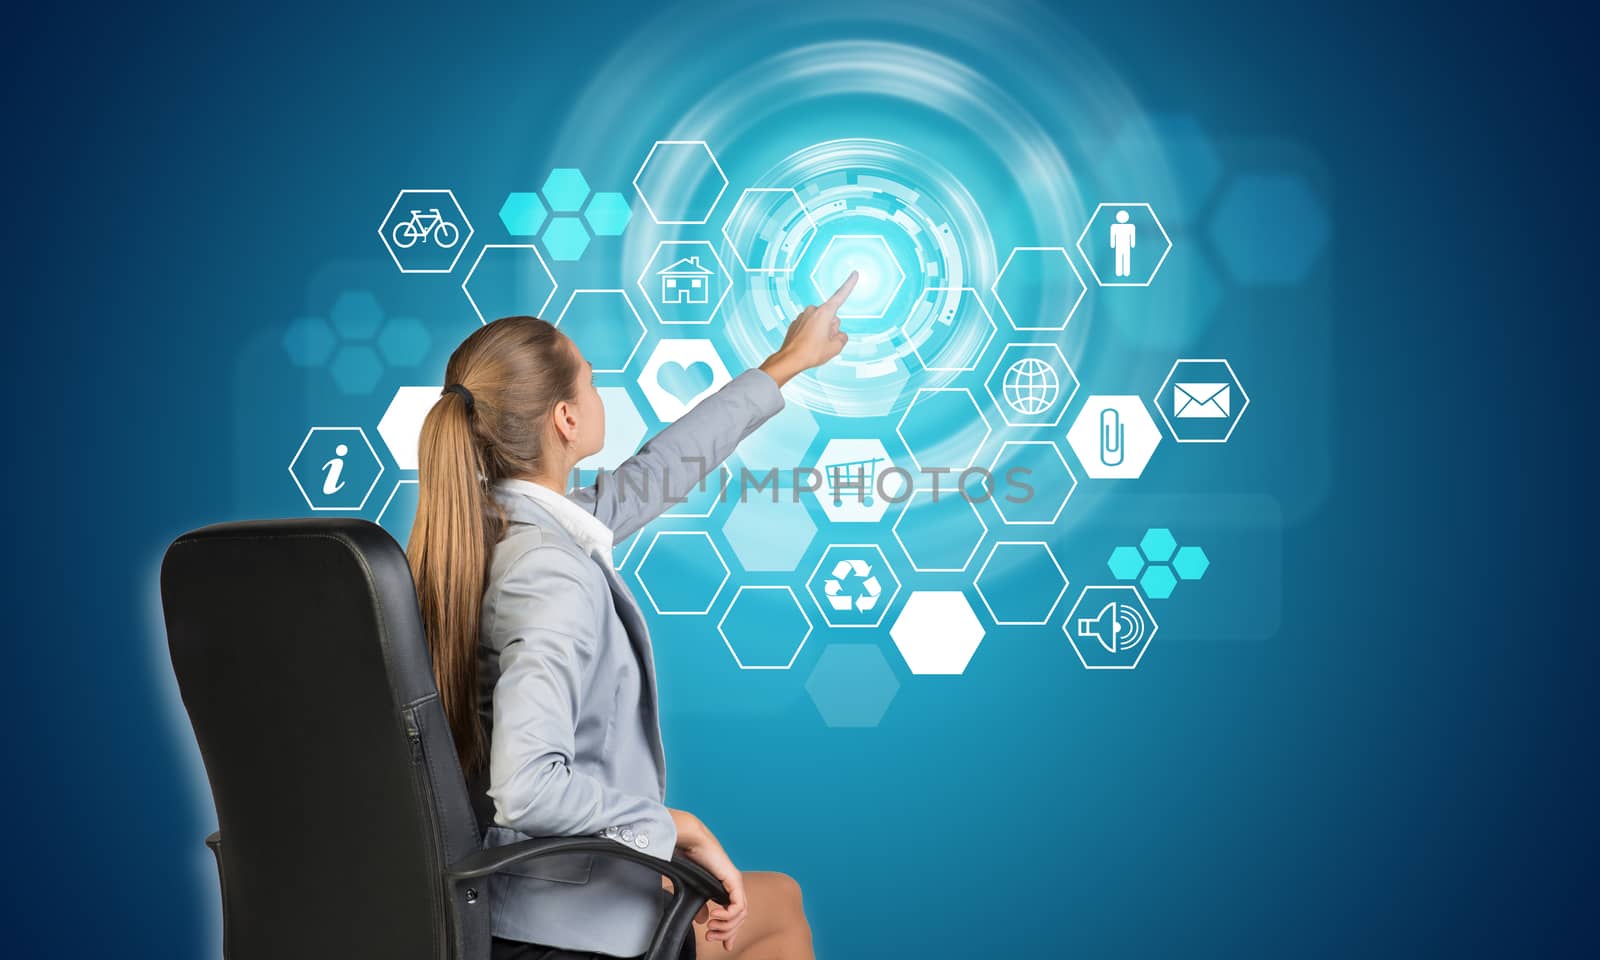 Businesswoman pressing touch screen button on virtual interface with honeycomb shaped icons, on blue background